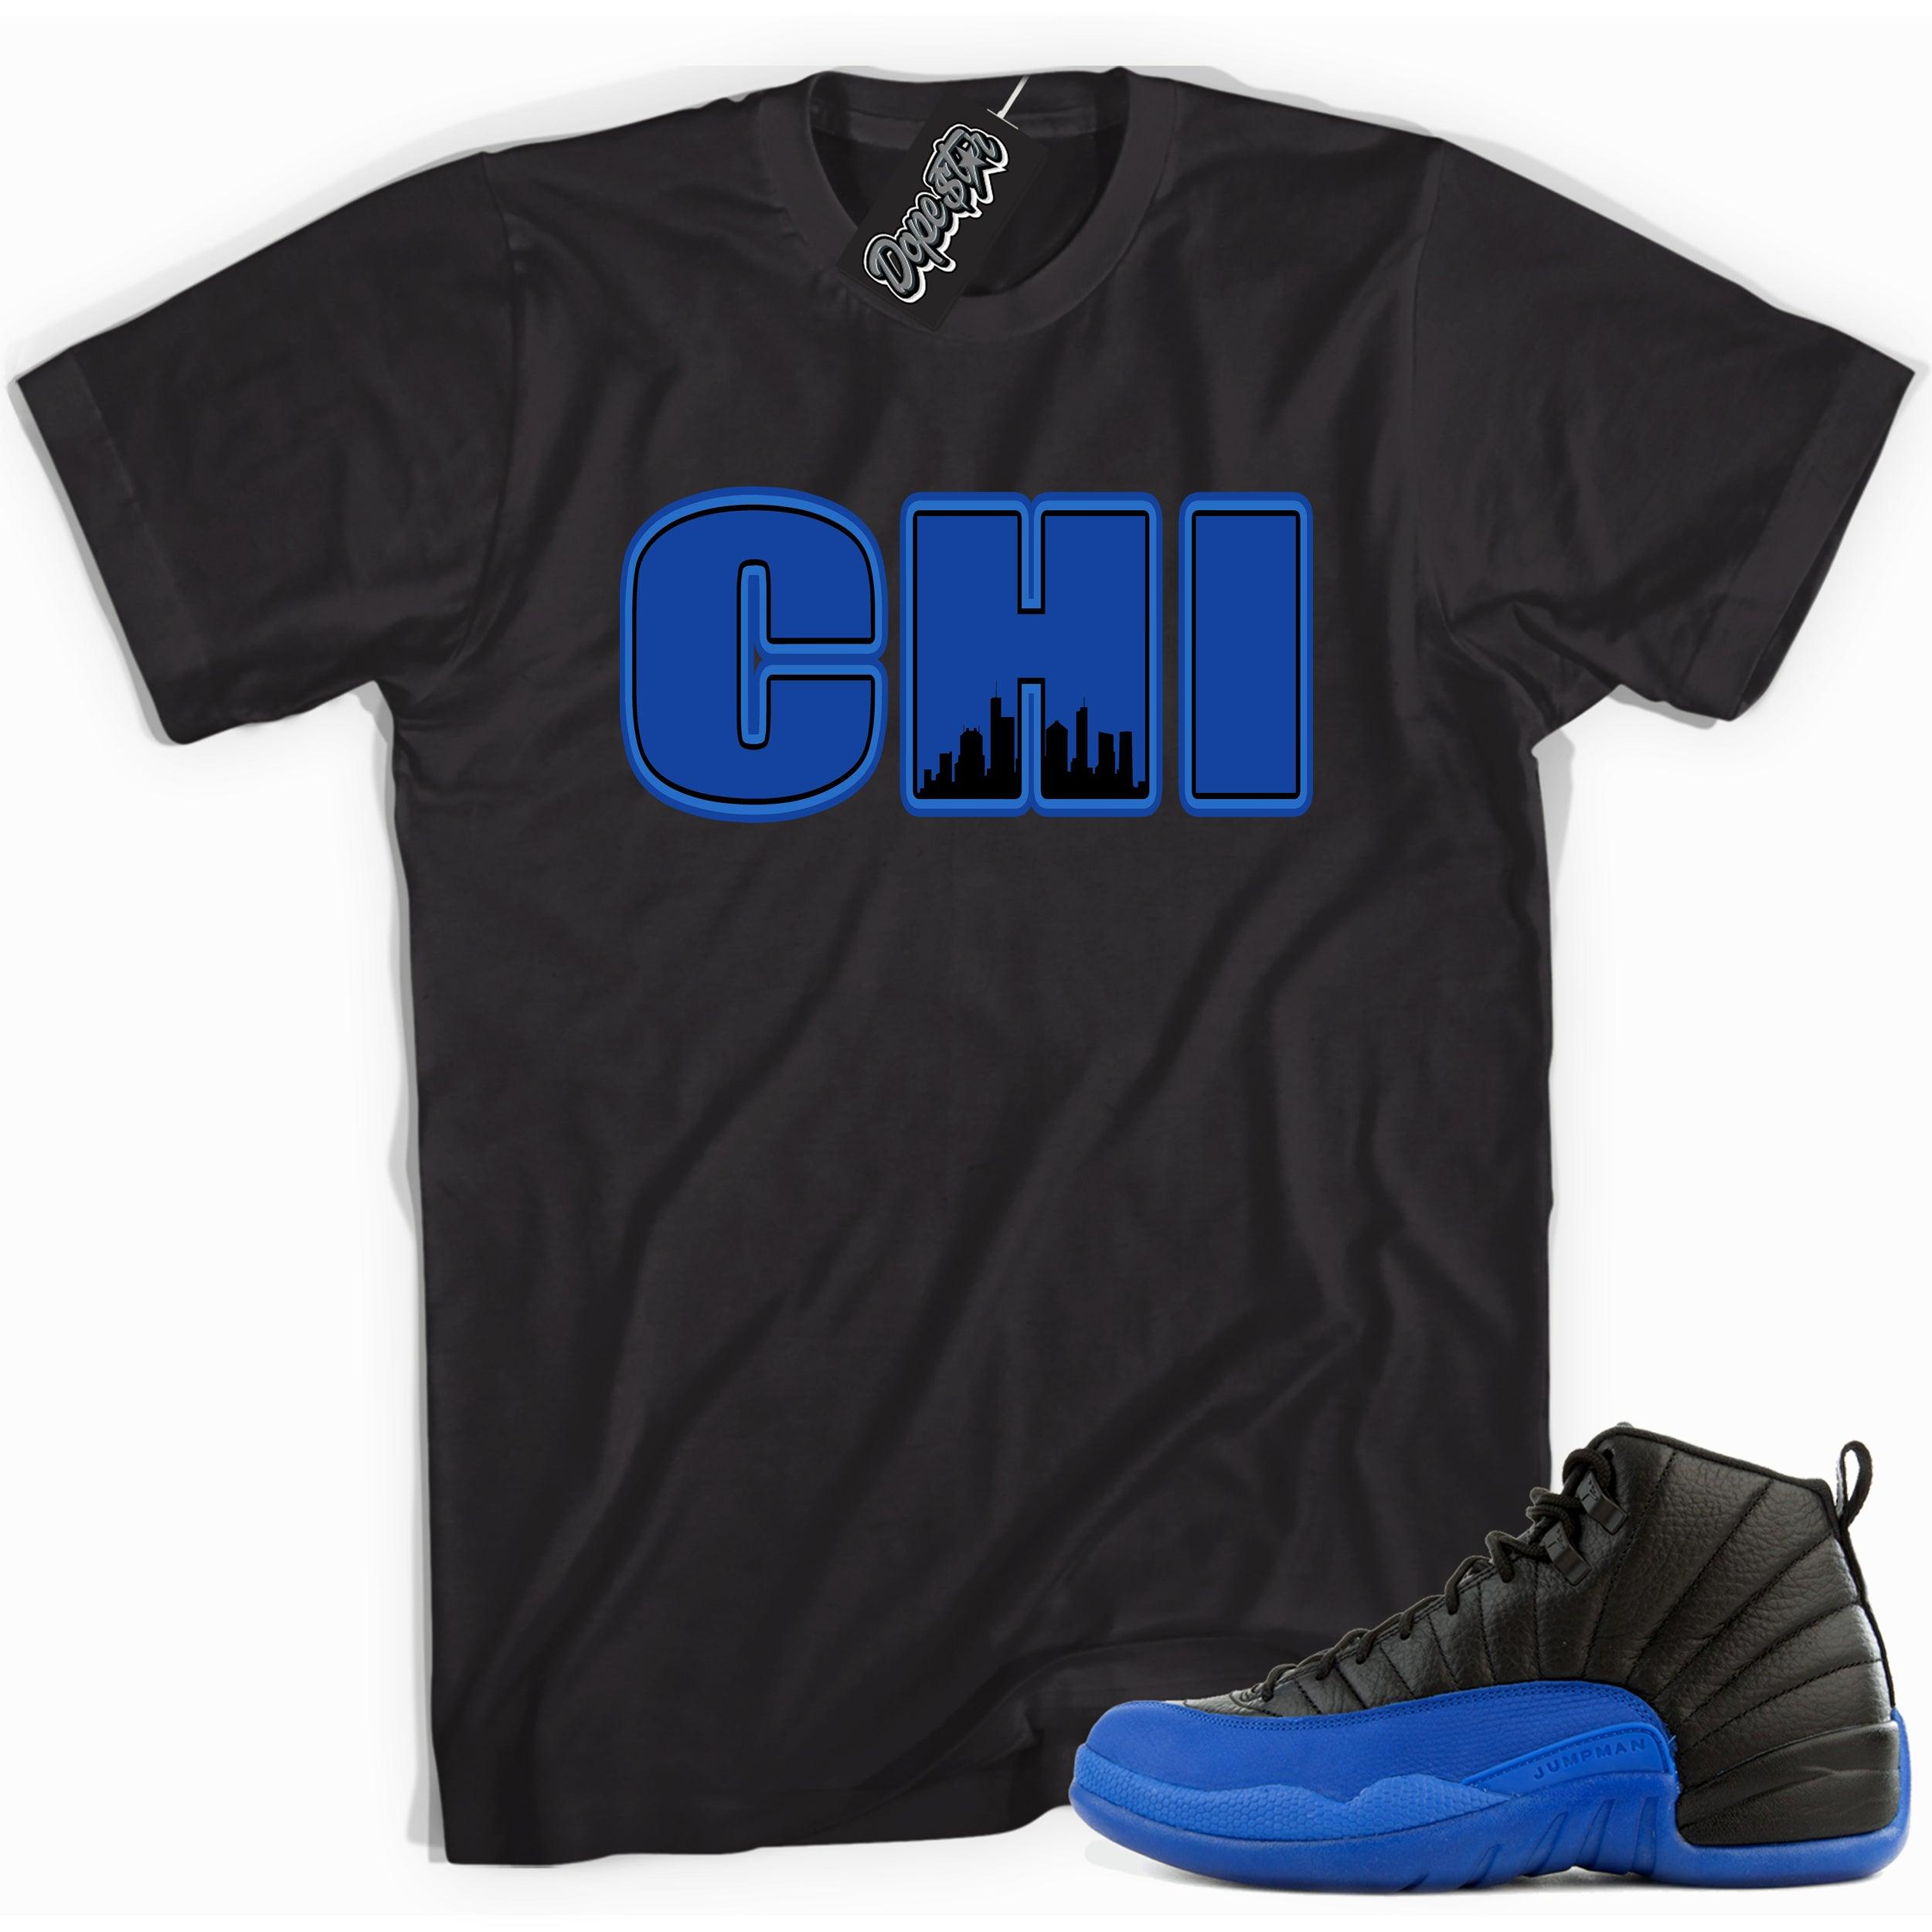 Cool black graphic tee with 'chi' print, that perfectly matches  Air Jordan 12 Retro Black Game Royal sneakers.